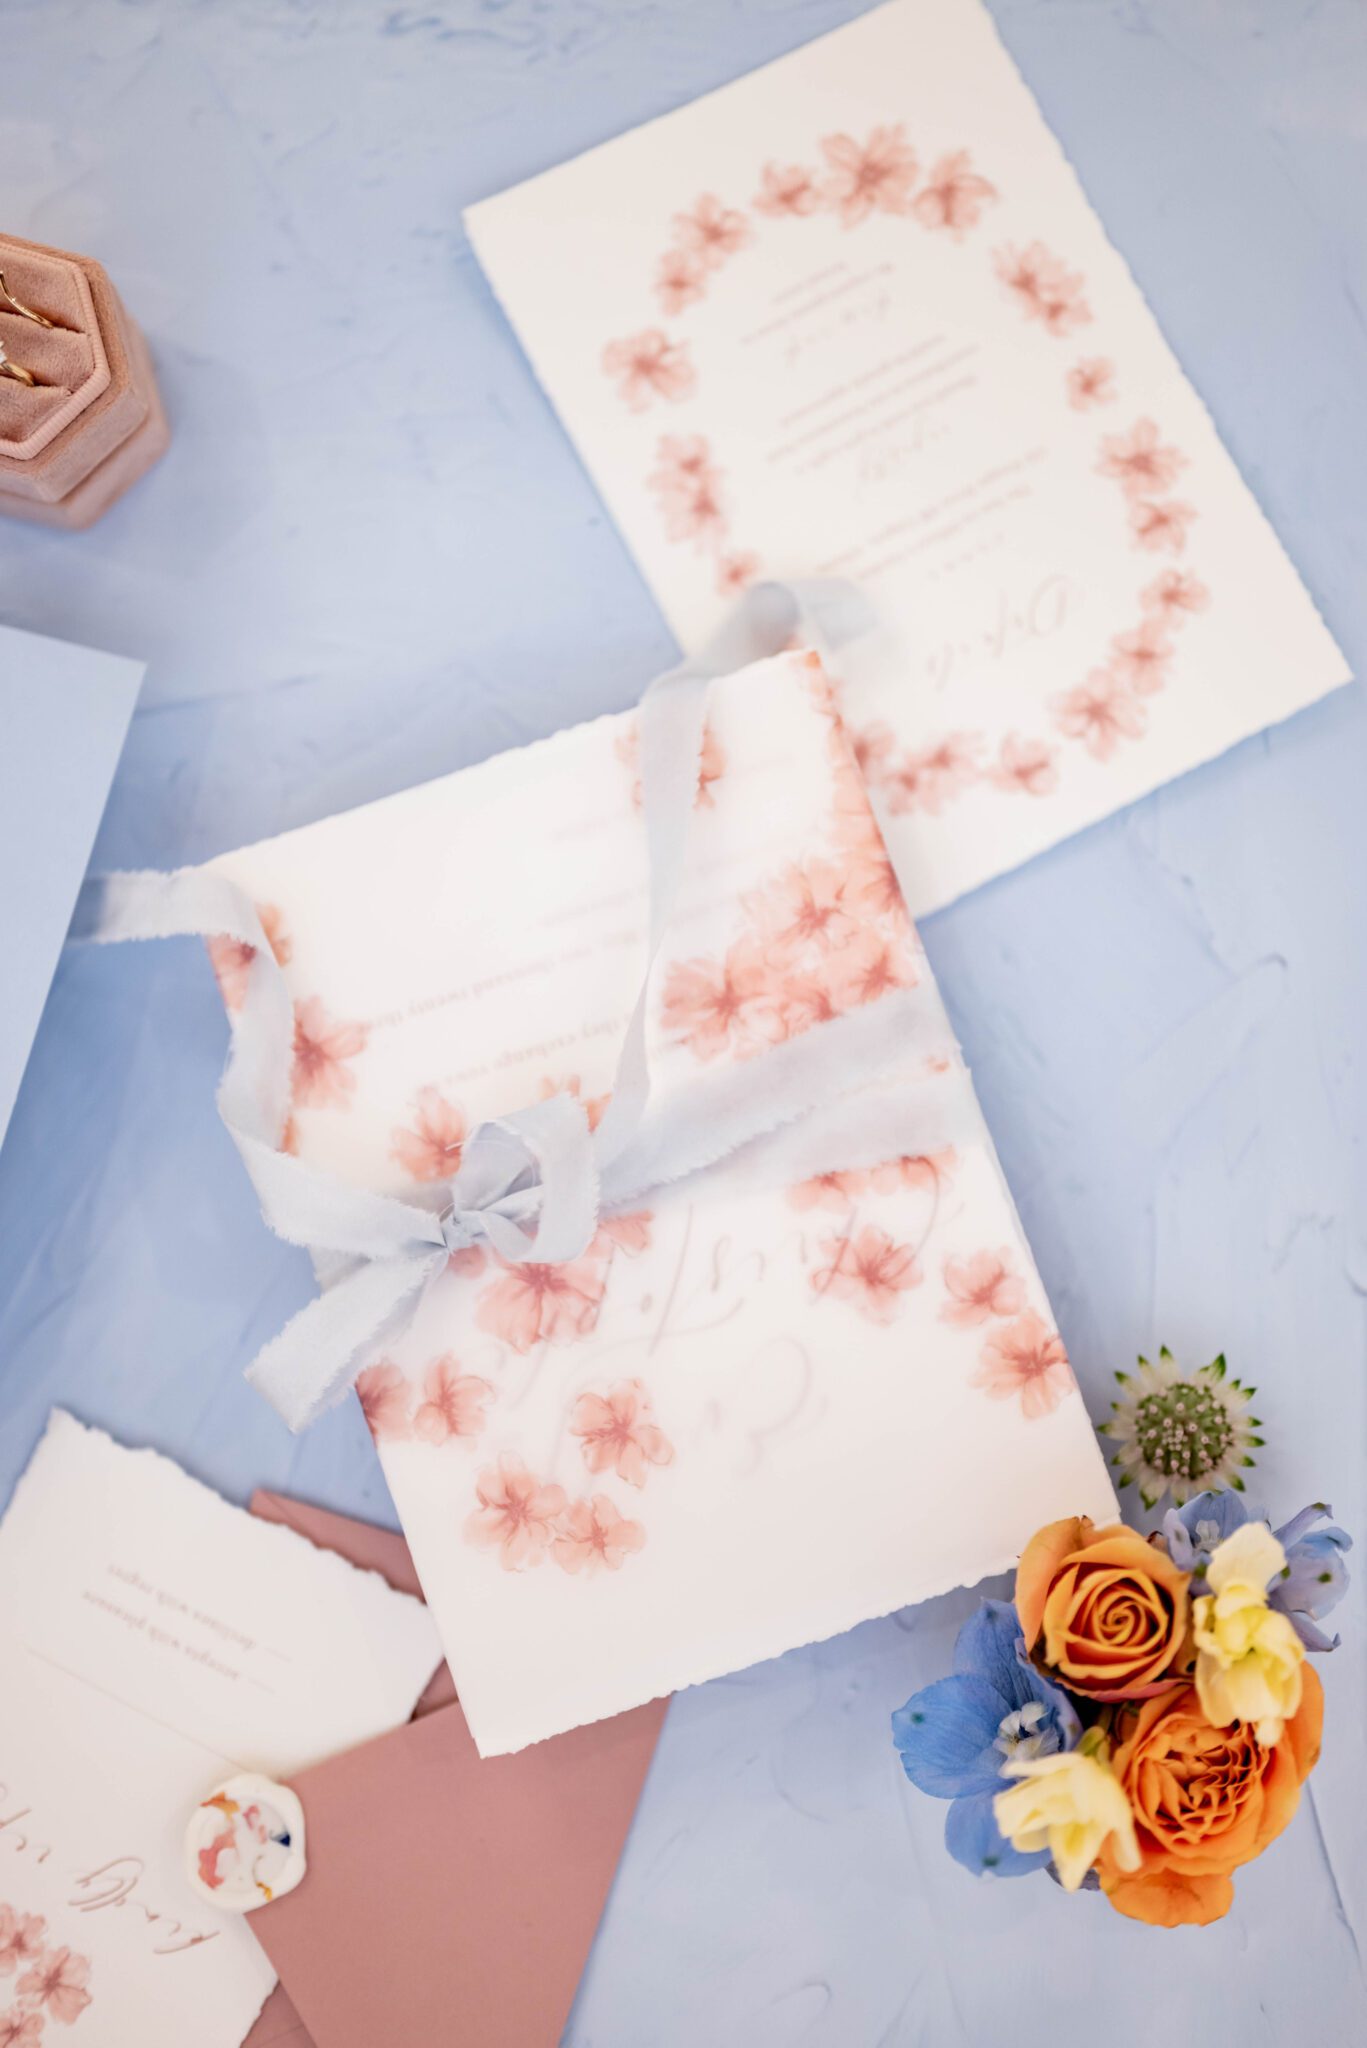 Spring inspired wedding invitation adorned with wildflower details by Seeking Light Studio, wedding stationery flat lay on baby blue velvet linen, wedding details photo inspiration featuring spring wild flowers in blue, orange and yellow